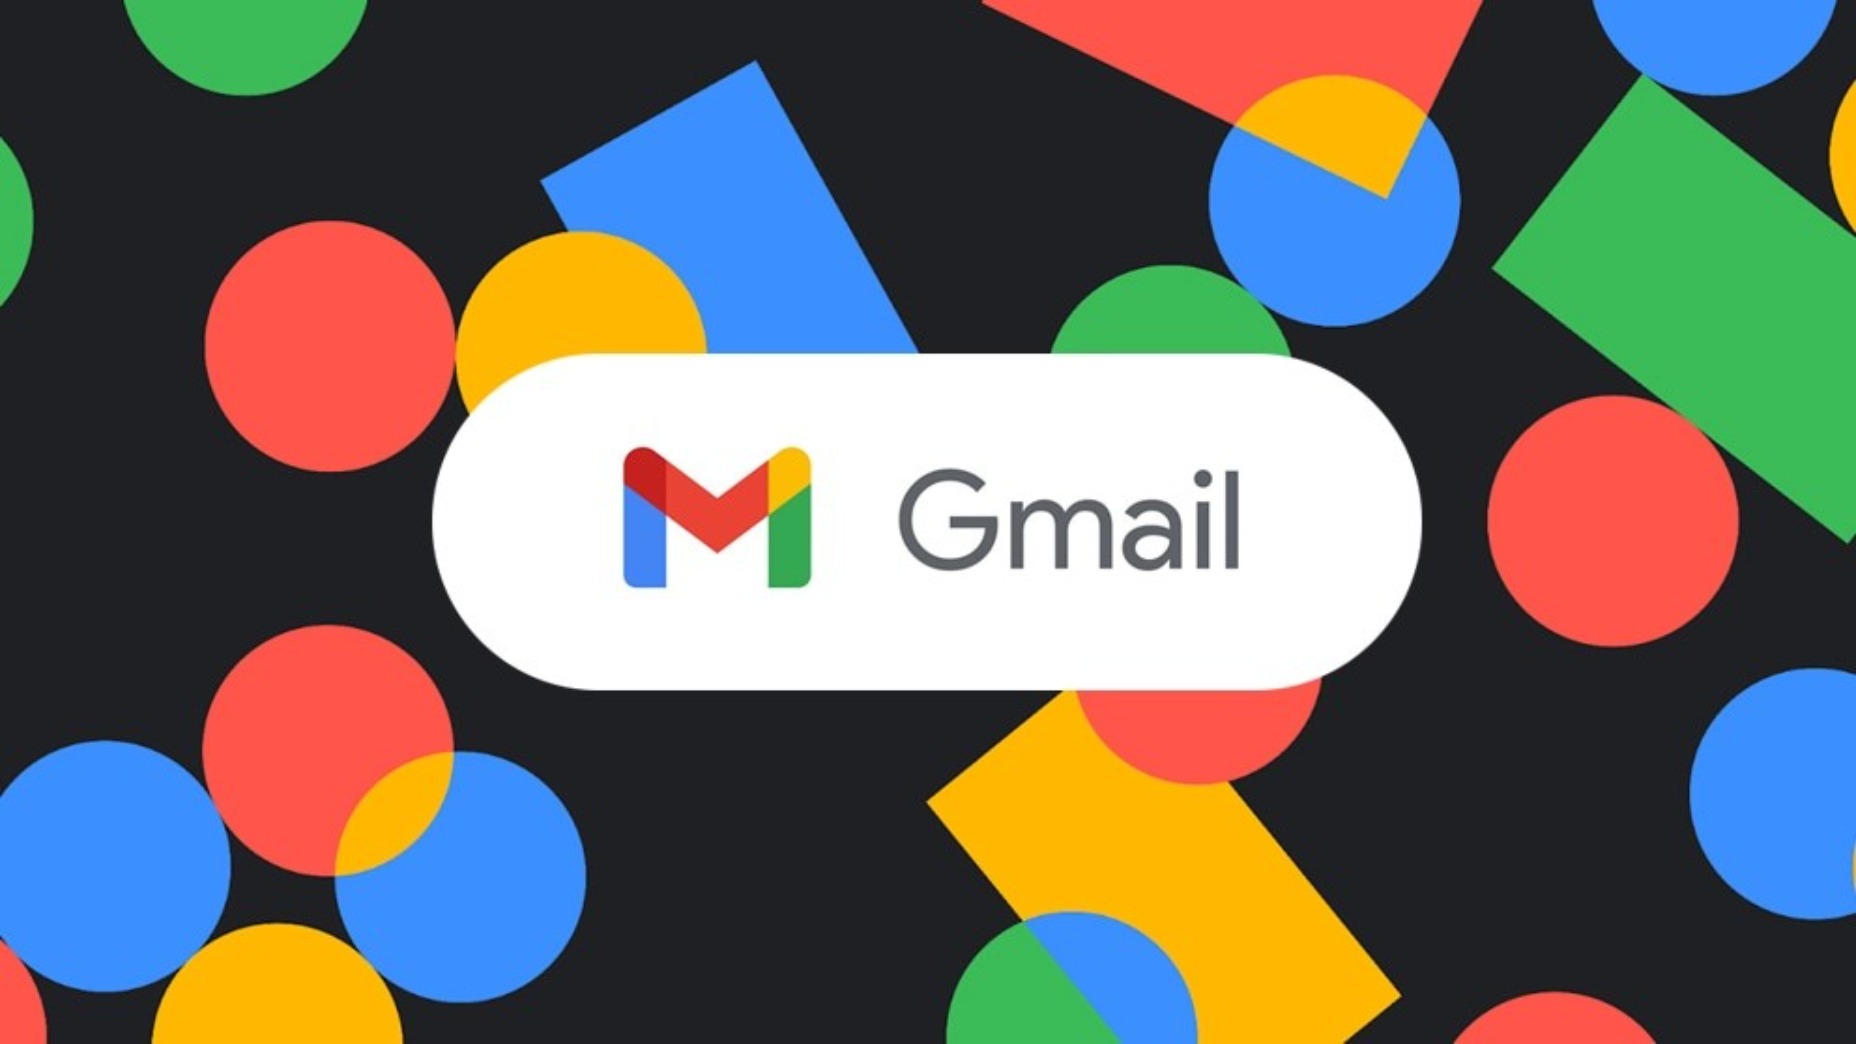 gmail featured image